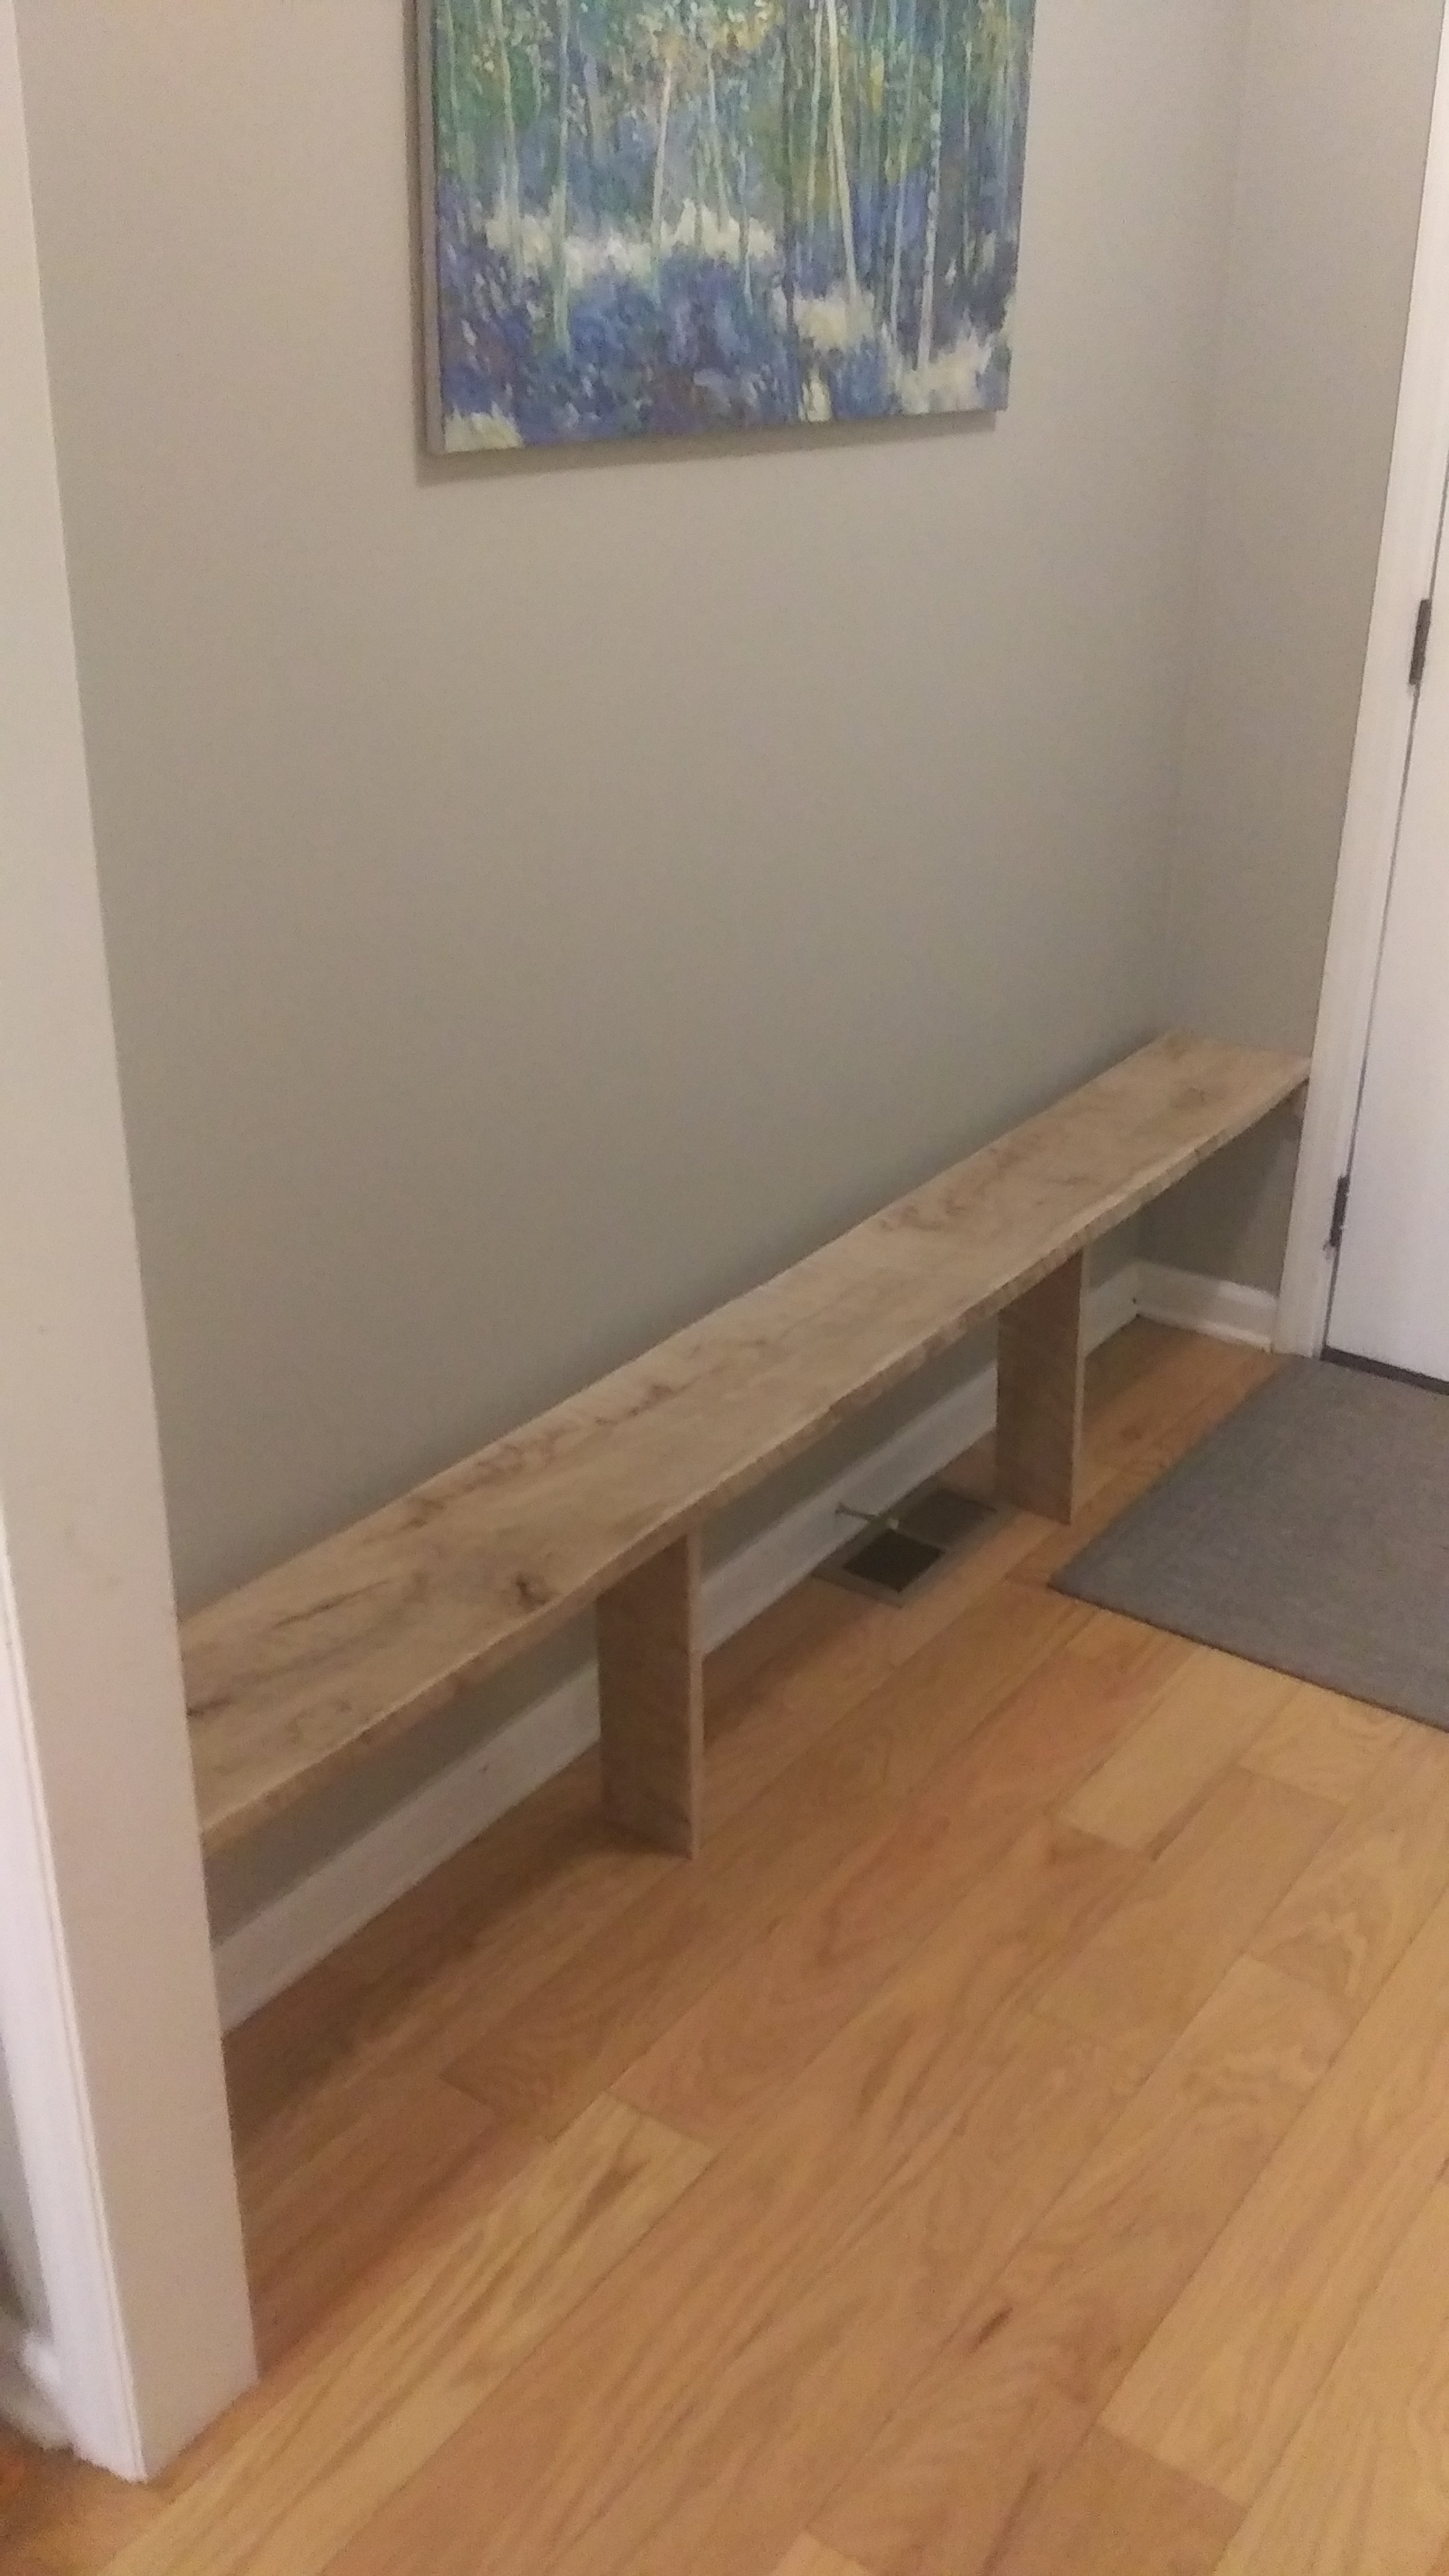  Barn wood bench in entry 